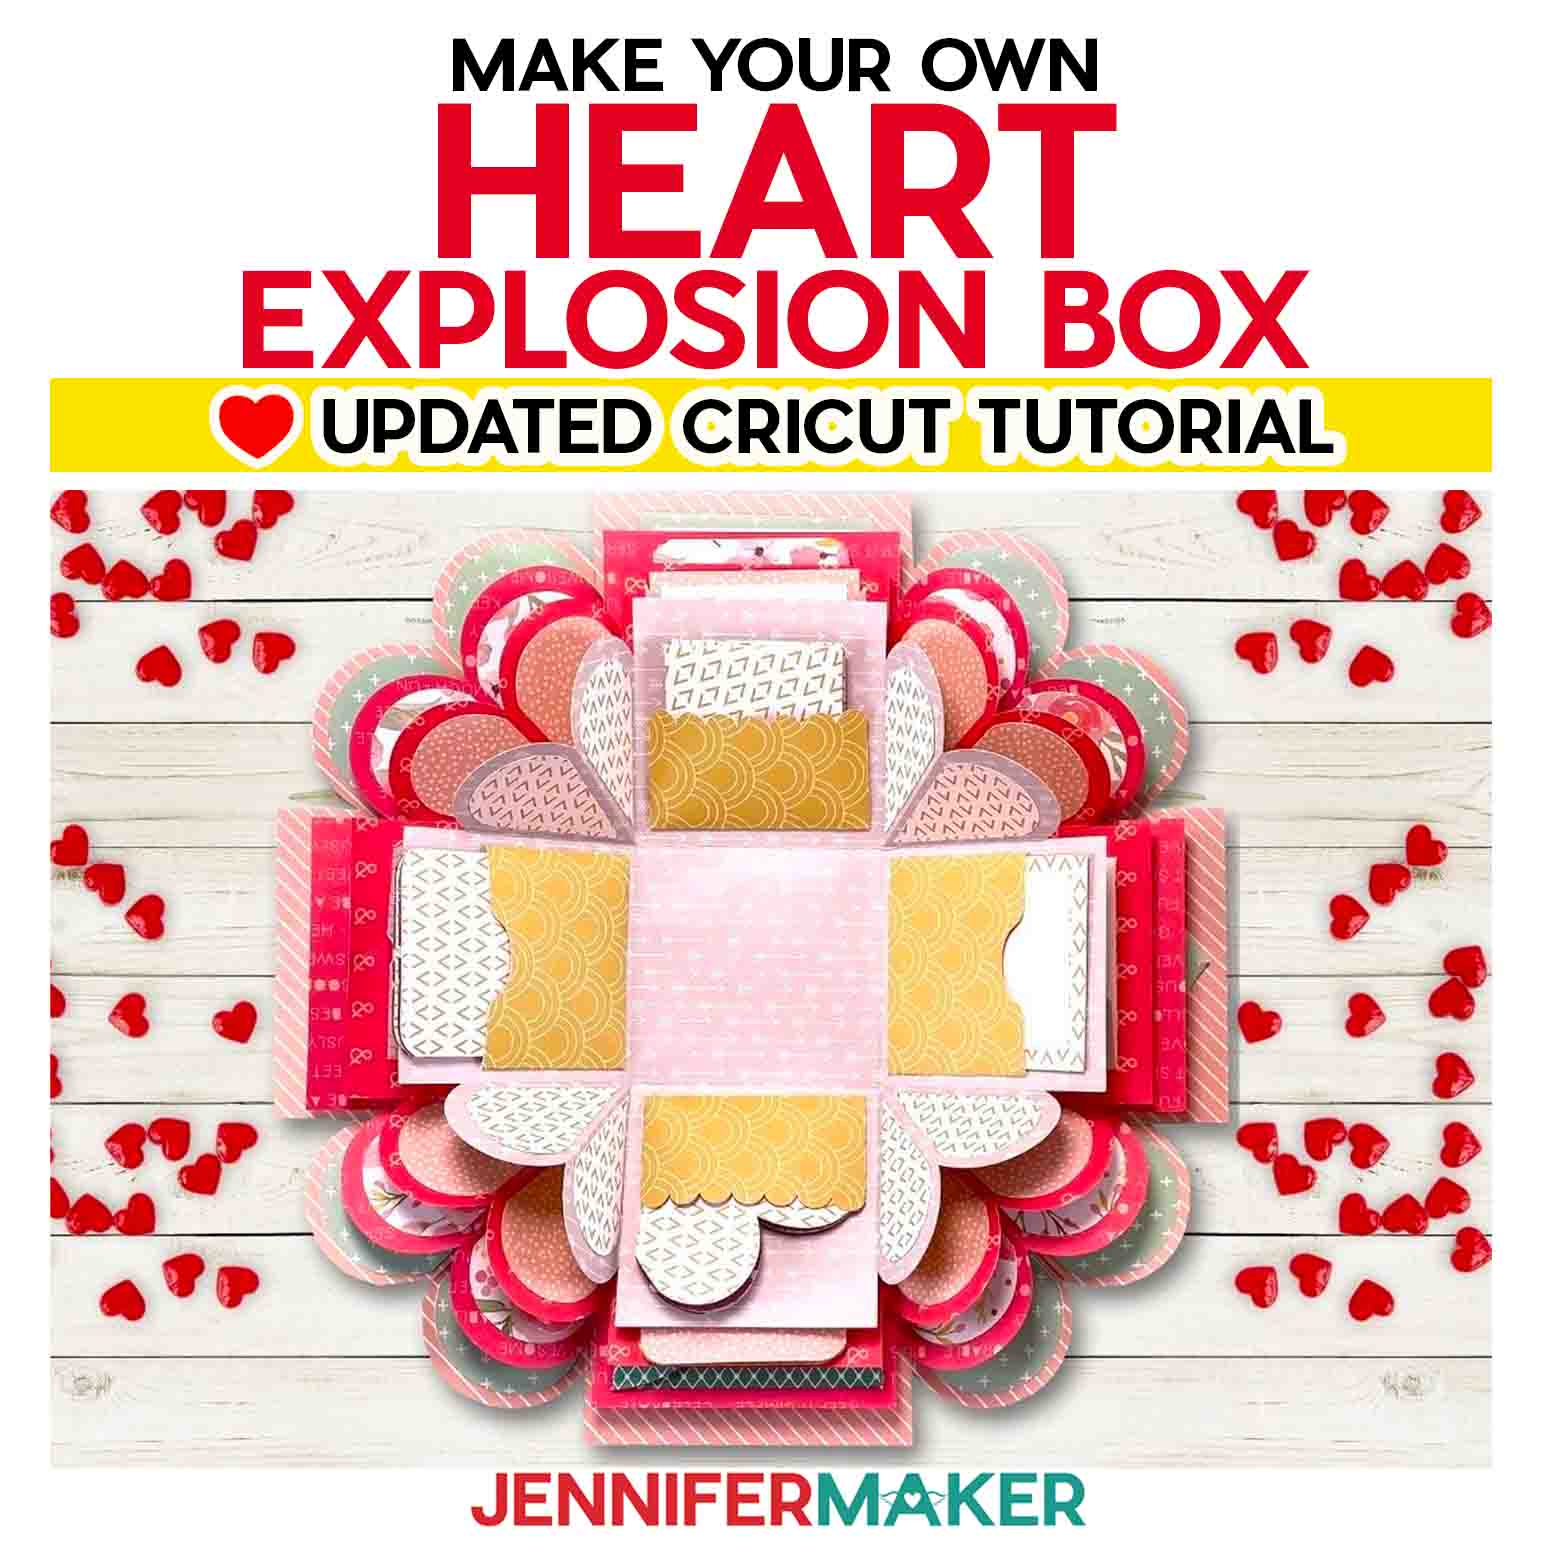 Make a beautiful heart explosion box to give as an amazing gift! Free SVG cut file , PDF patterns, and full instructions to make this on your Cricut at home!